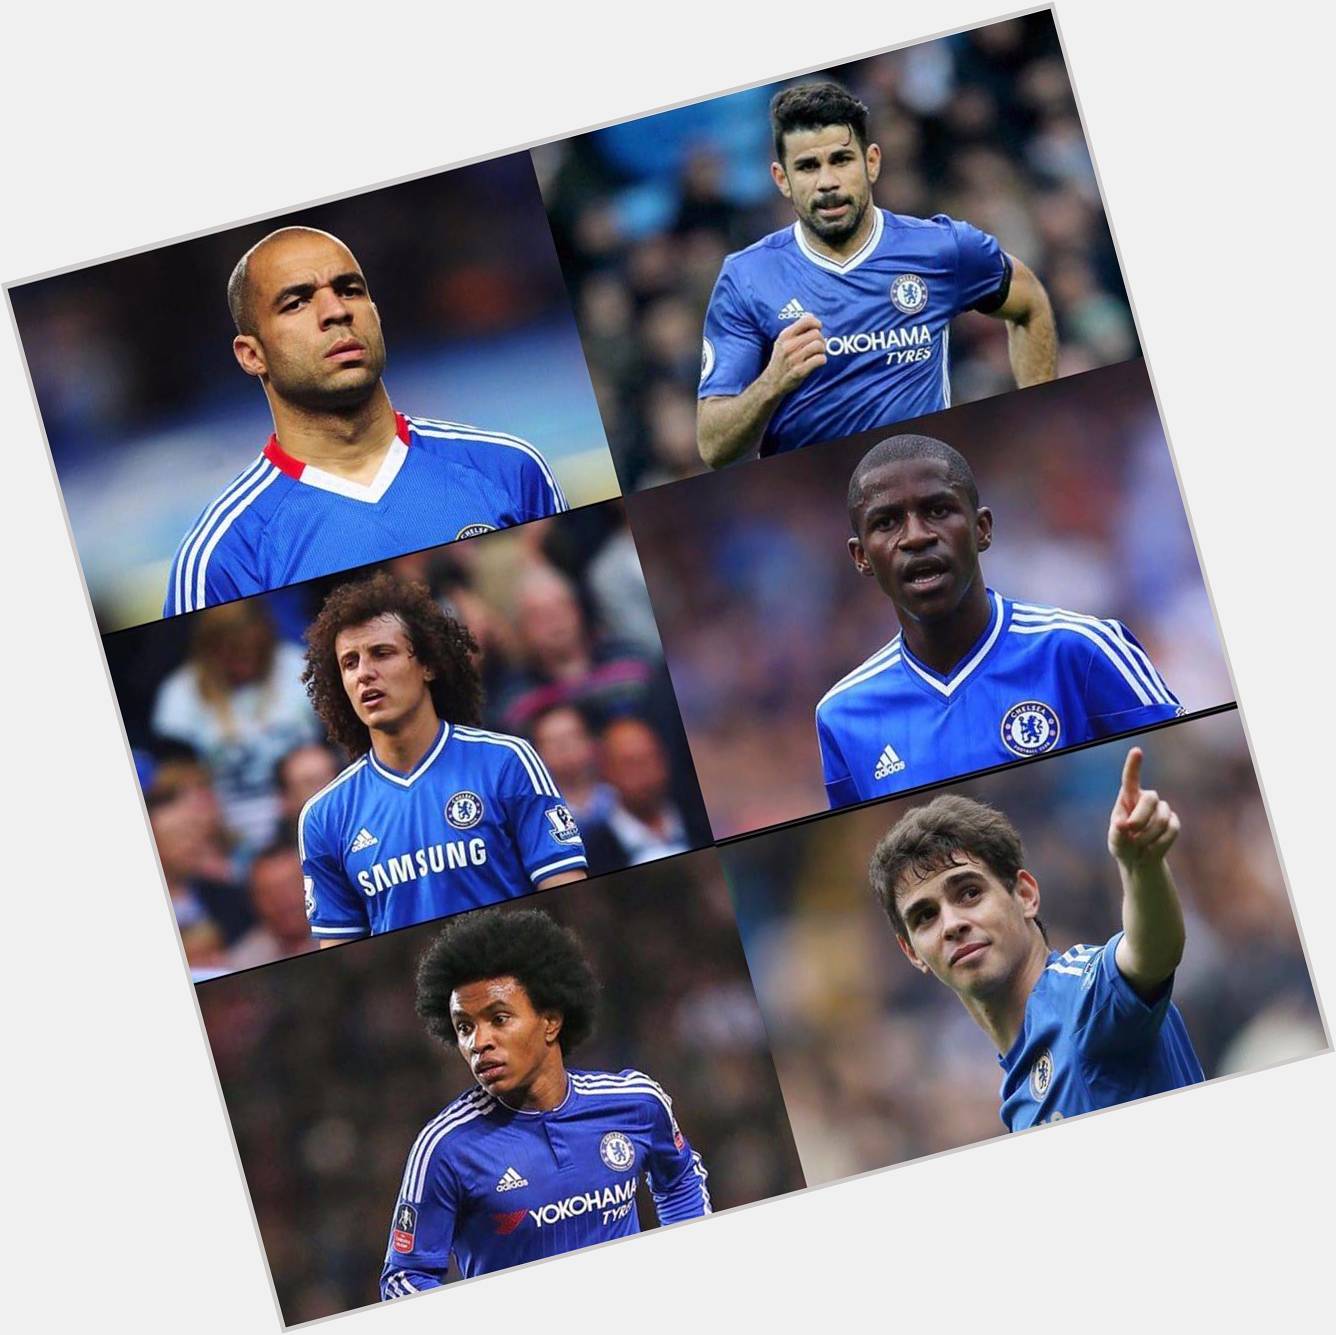 Love all this Lads but I choose Diego Costa Happy birthday to Diego as well as it is his birthday today. 